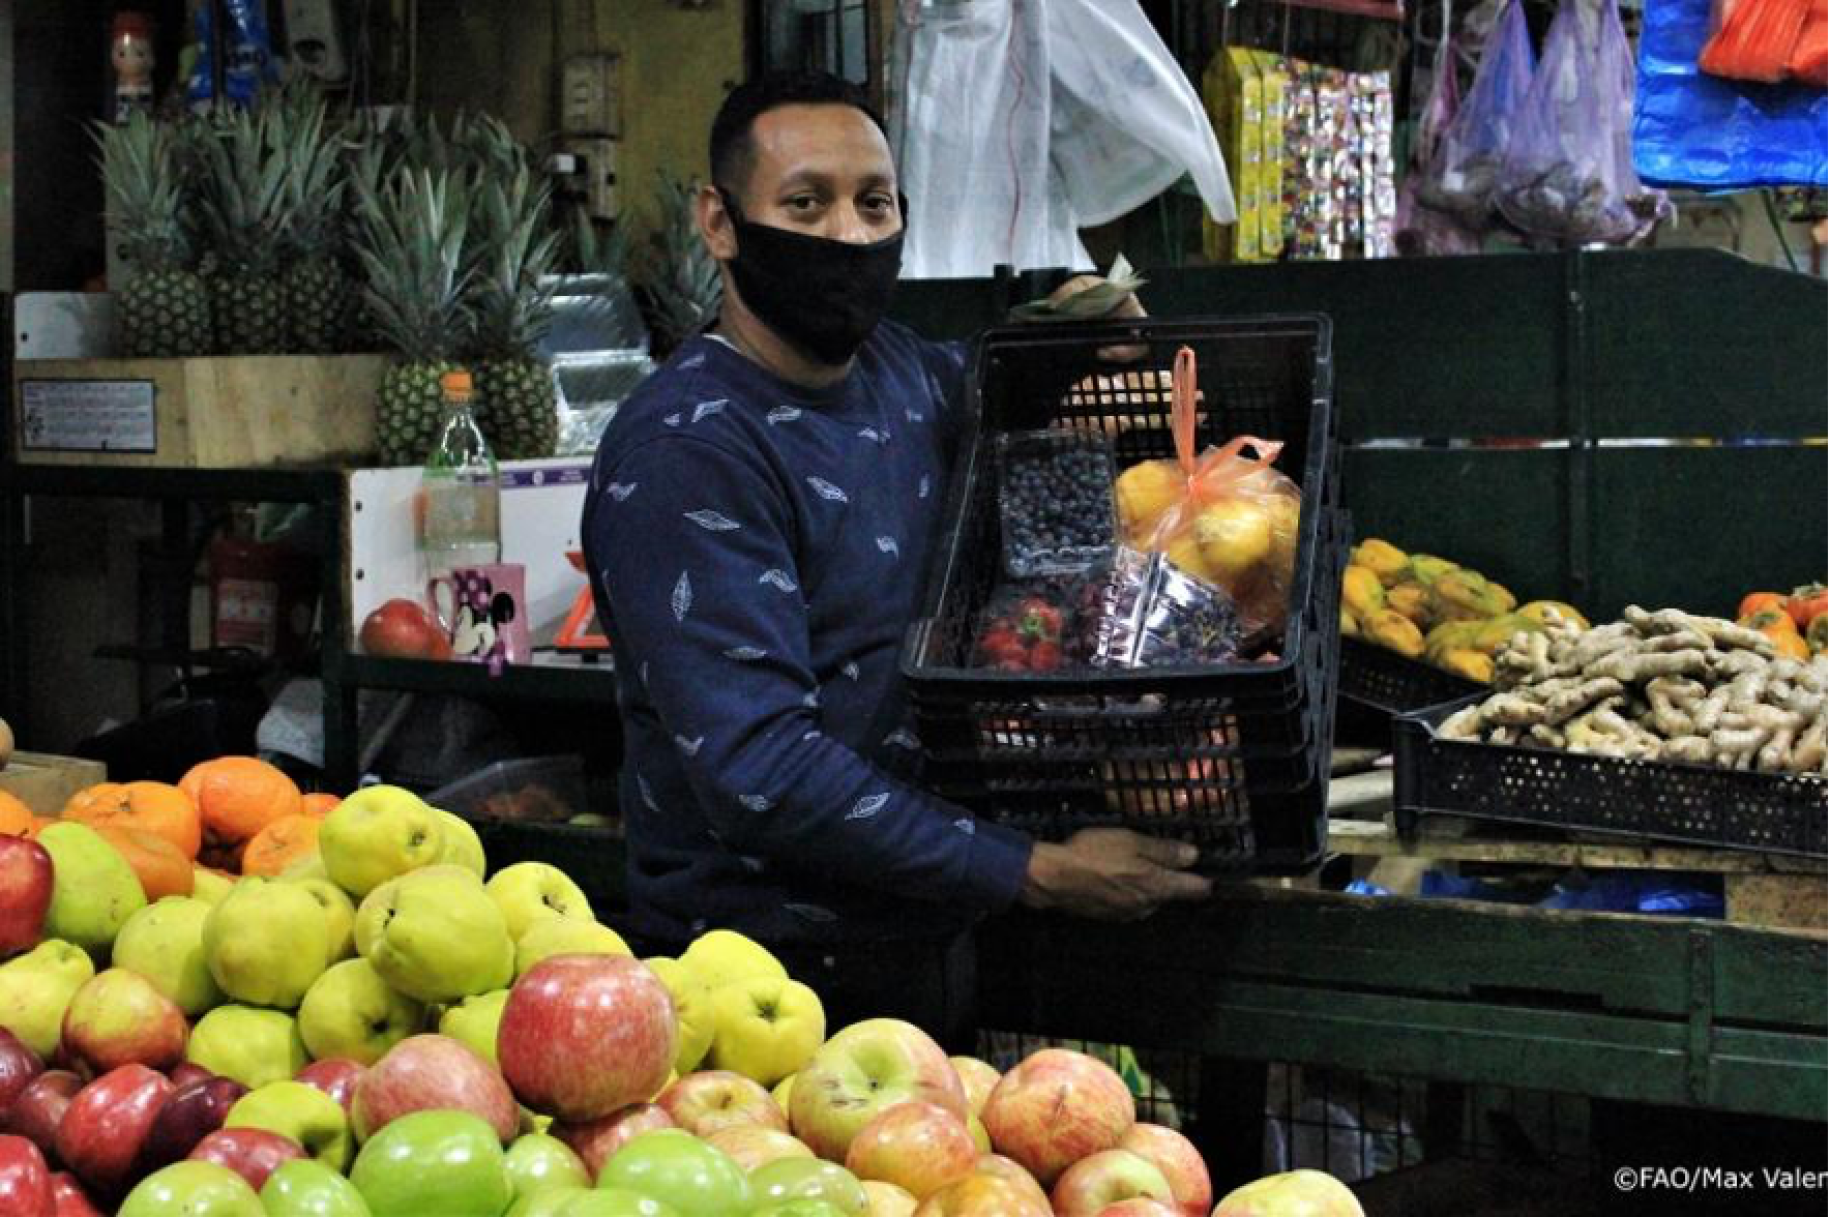 A man holds up a crate of of fruits and vegetables at a local food vendor.